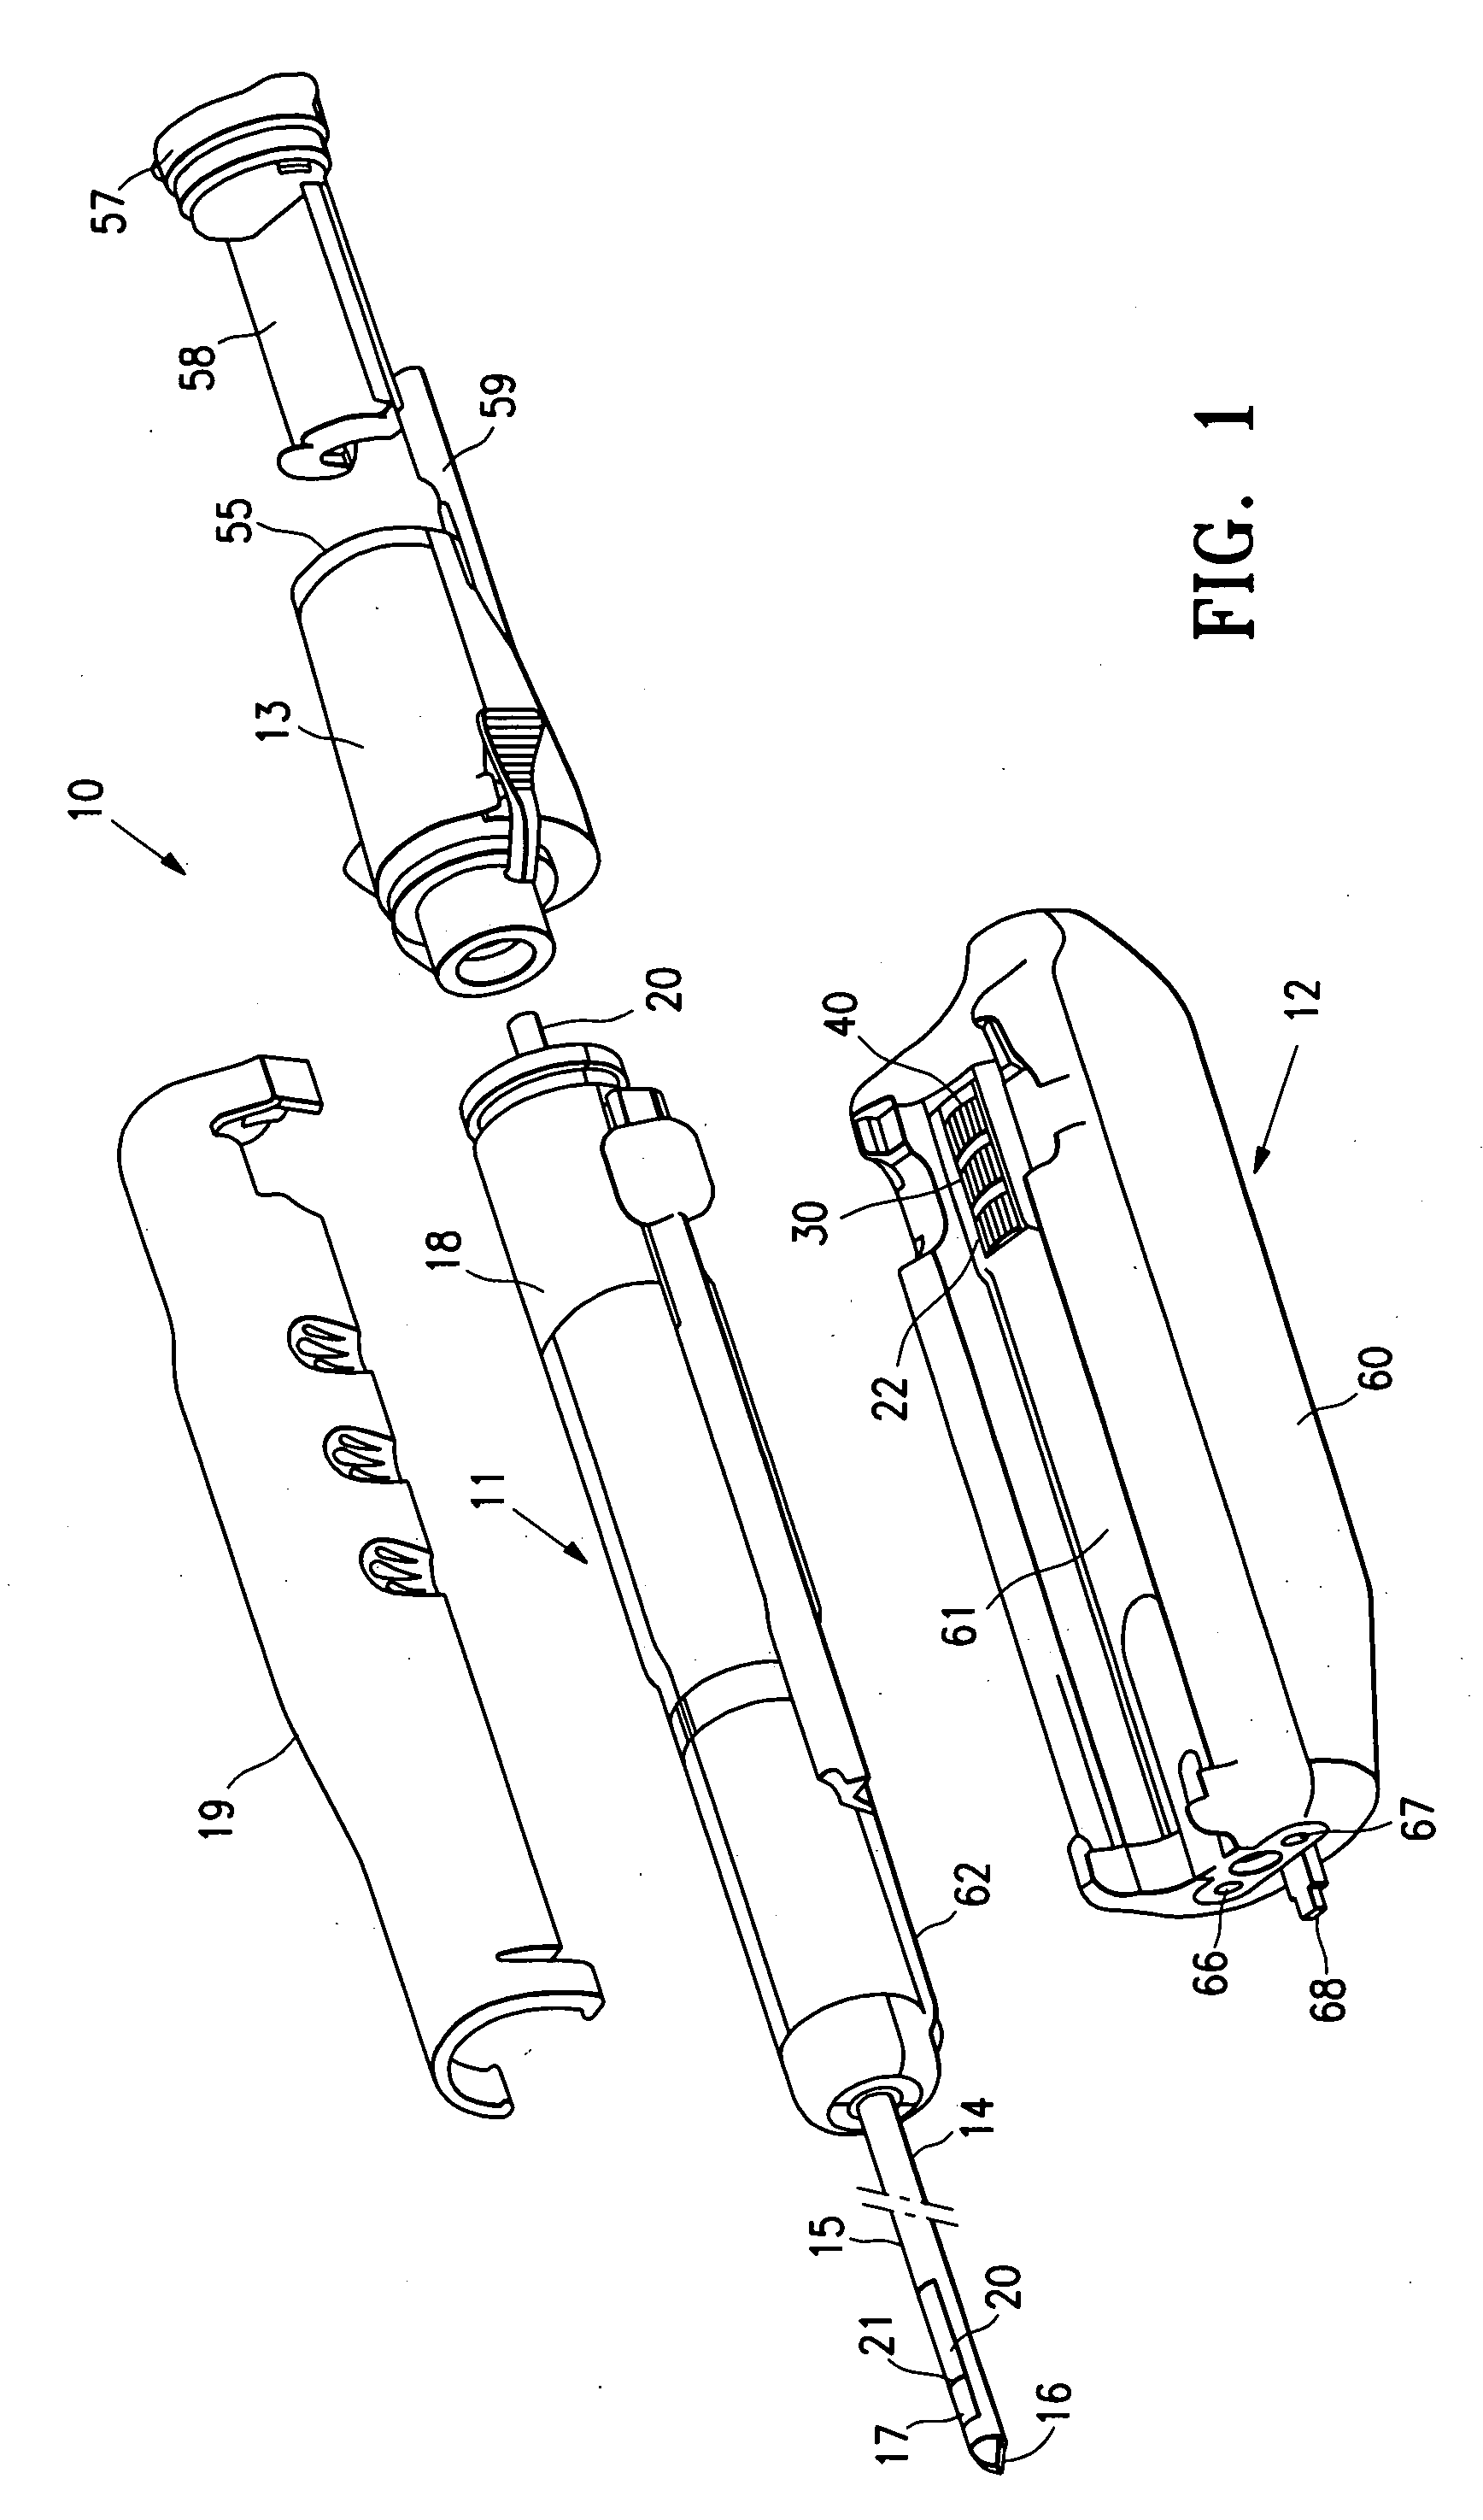 Graphical user interface for tissue biopsy system